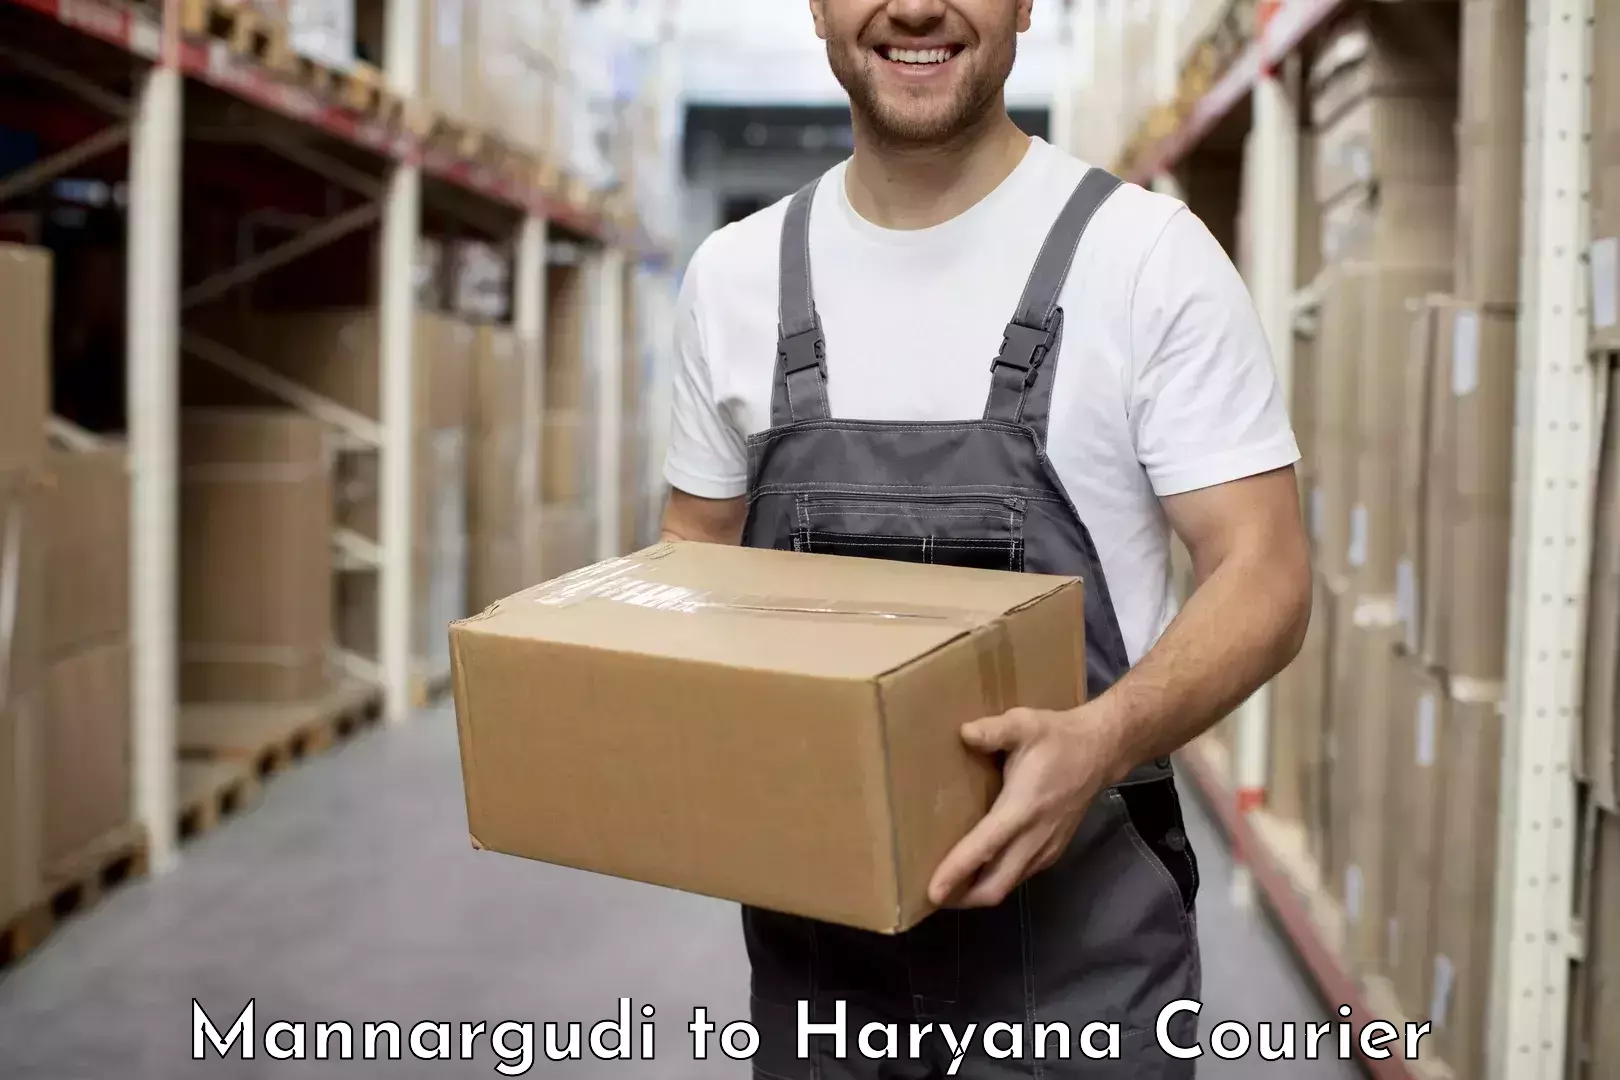 Overnight delivery services Mannargudi to NCR Haryana